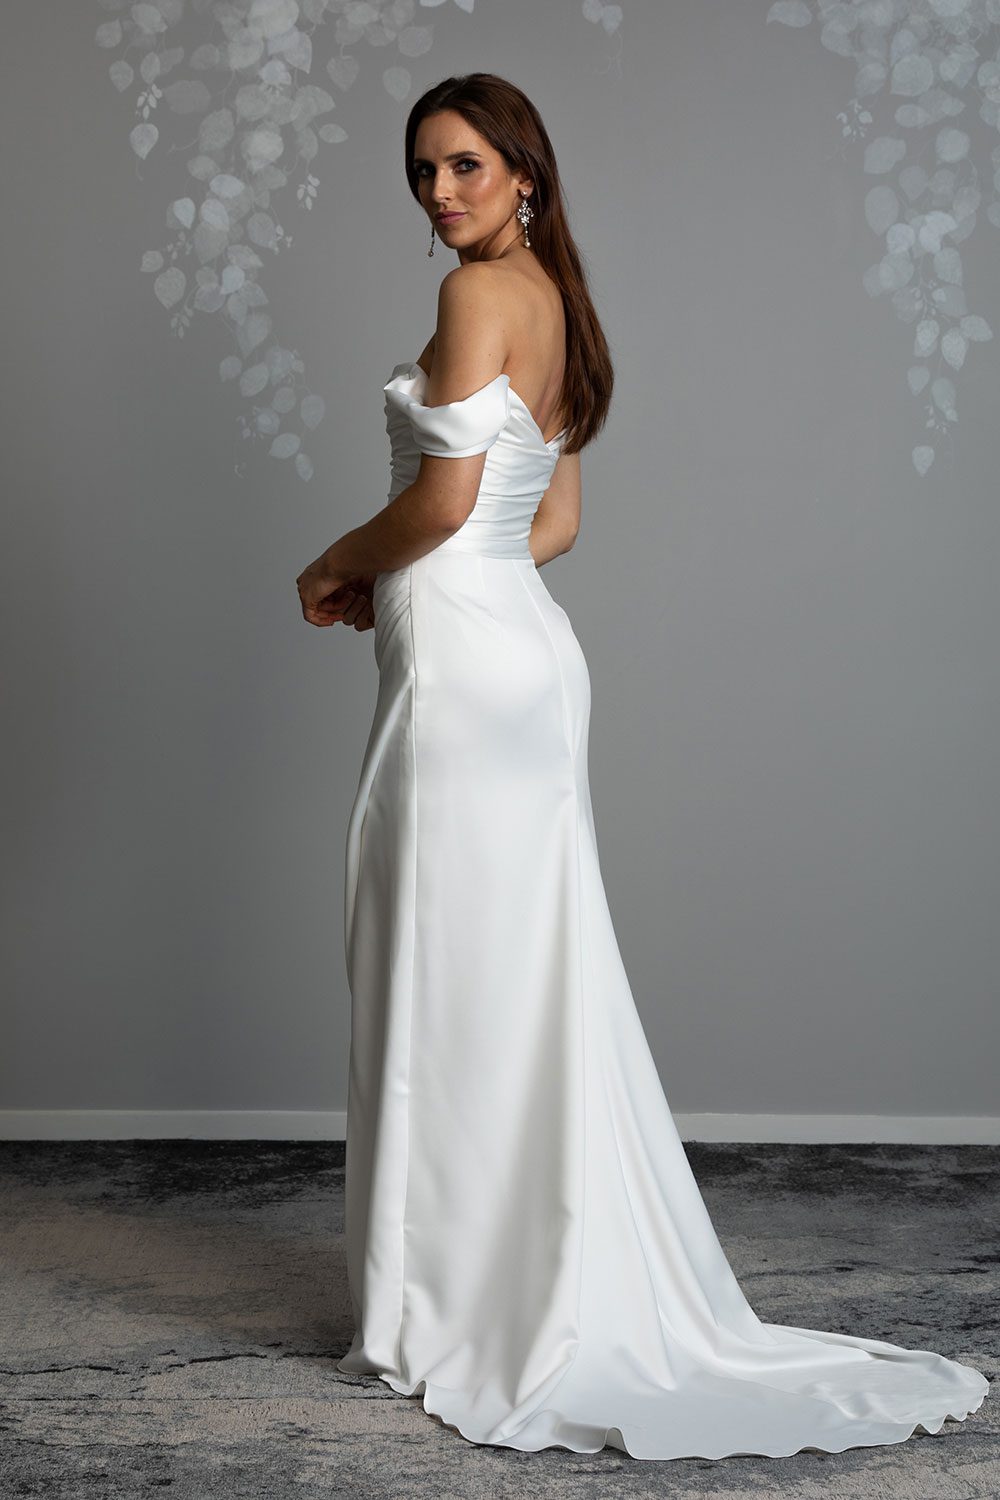 Christina Wedding Dress by Vinka Design - Featuring a sculptured, fitted bodice with a scoop neckline that flows seamlessly into a beautiful off shoulder detail. The draping from the bodice drops from the hips into a gentle fit and flare skirt, falling into an elegant train and features a concealed side split that reveals a subtle hint of leg. Profile view of model showing off shoulder detail and fitted bodice with fit and flare skirt with train